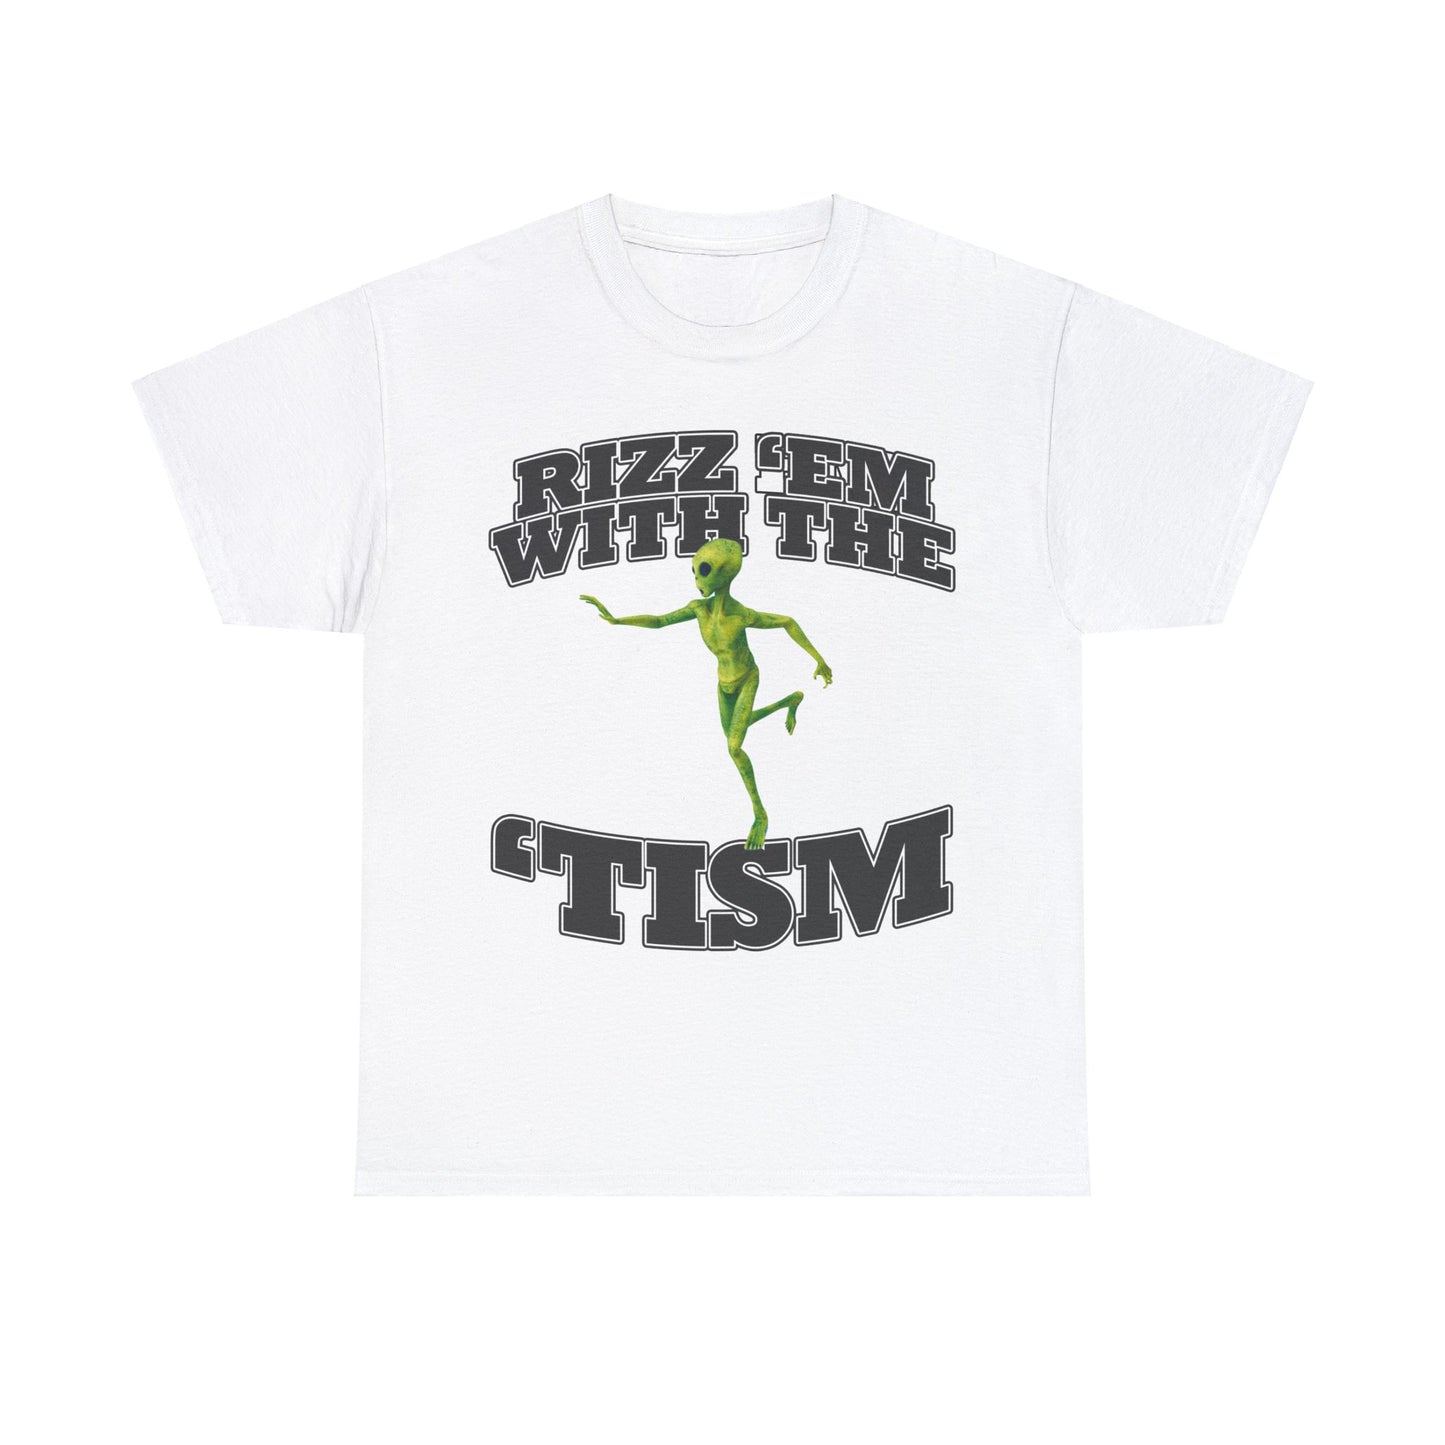 Rizz Em' With The 'Tism Alien T-Shirt